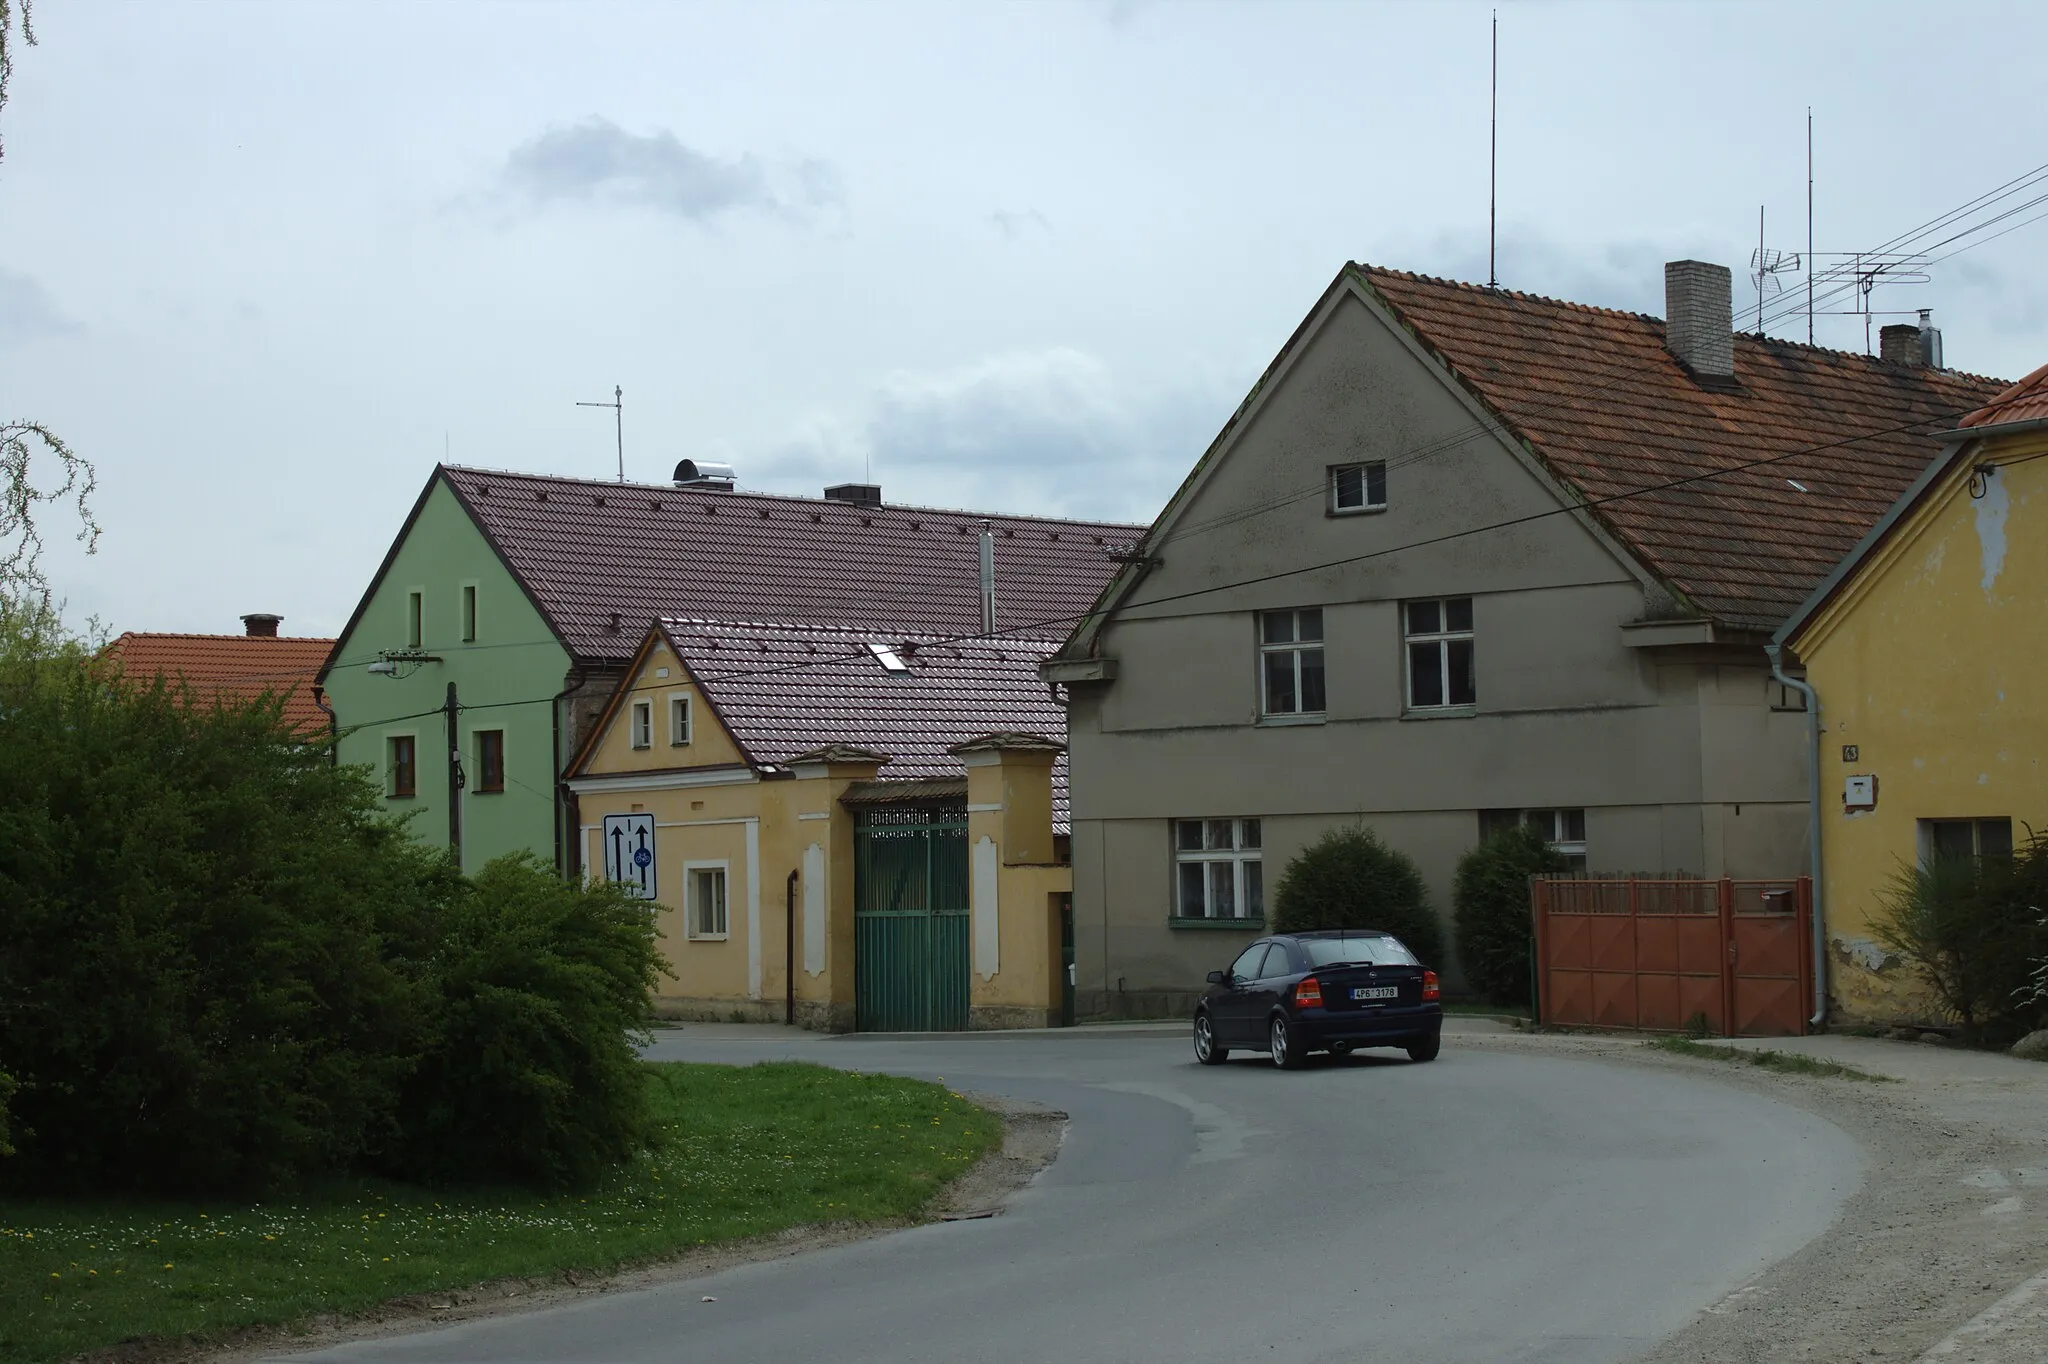 Photo showing: Buildings on the main common in the village of Chrastavice, Plzeň Region, CZ